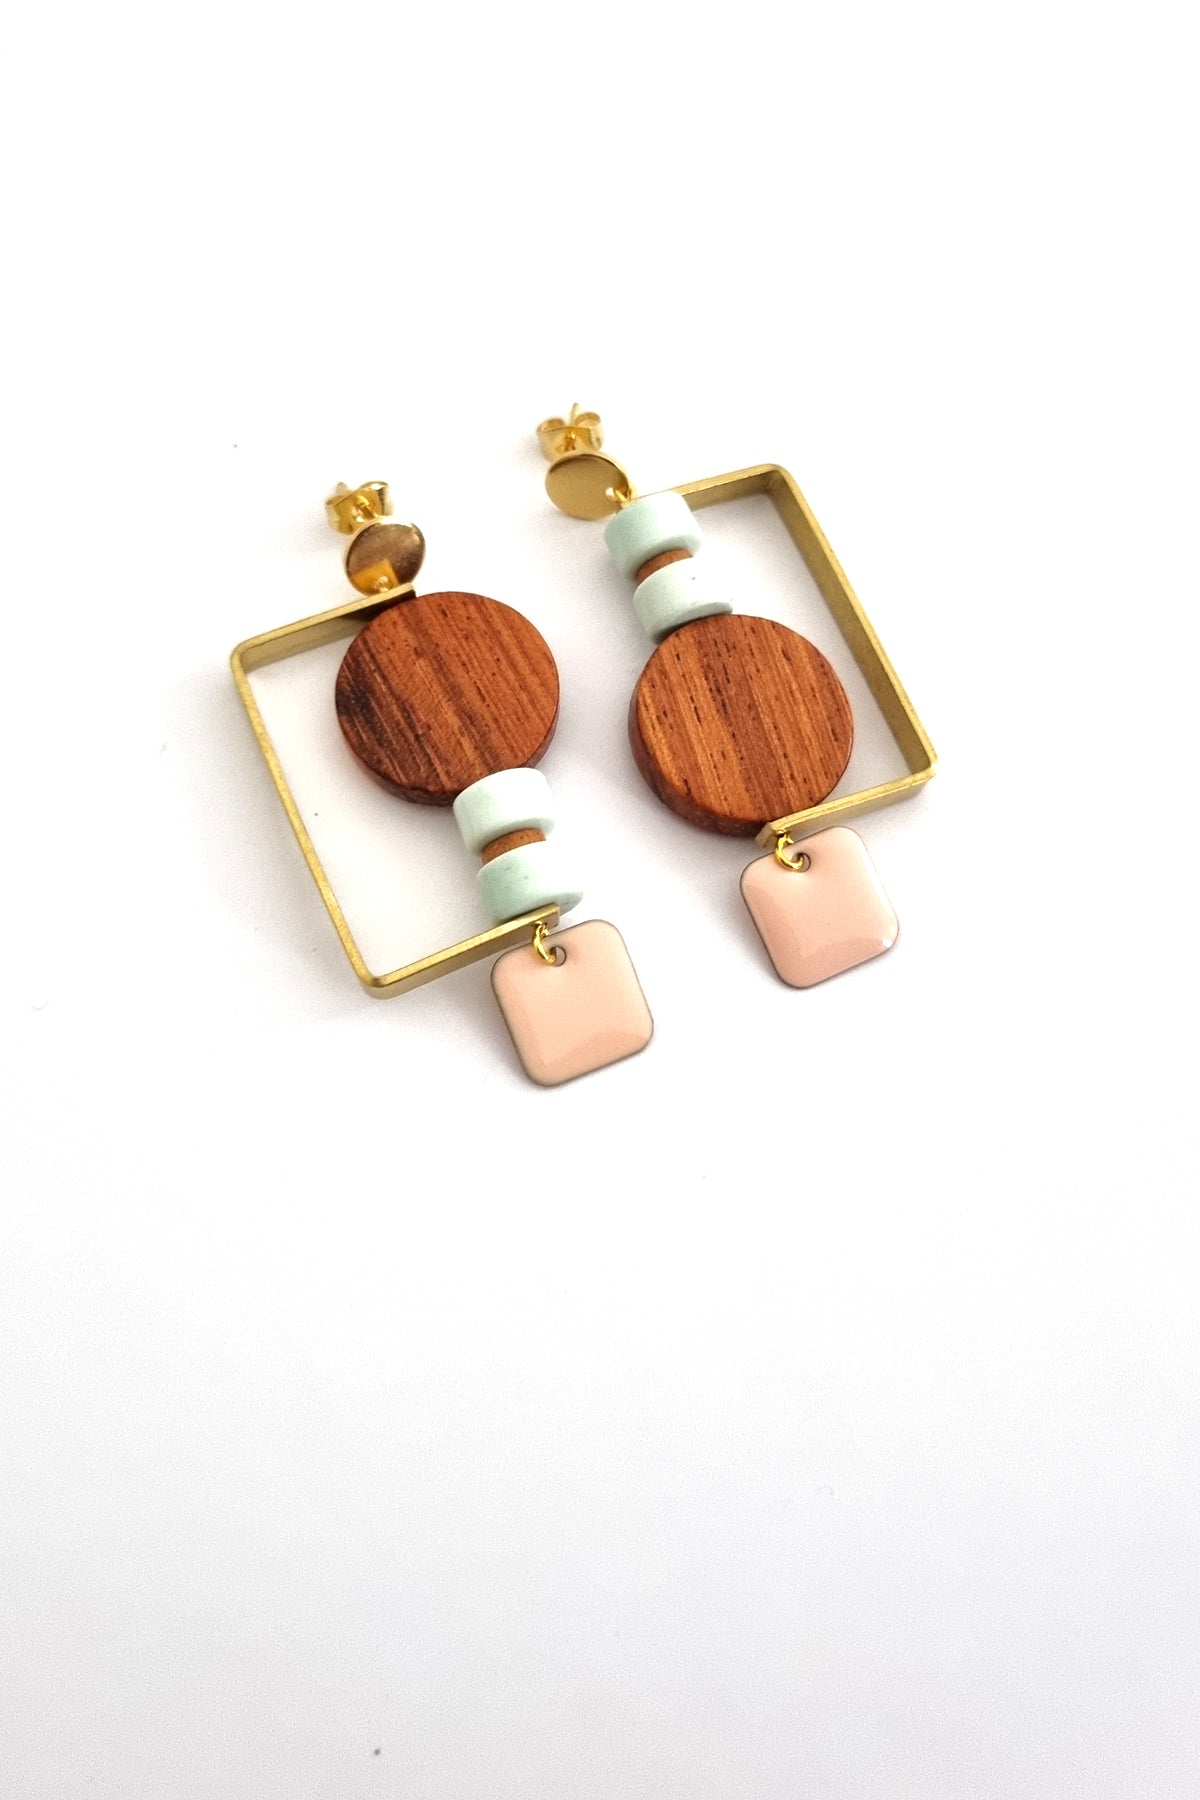 A pair of stud dangle earrings lay against a white background. They feature a half square brass shape that envelopes a circular wooden bead, and two aqua stone beads separated by a small wooden bead. The design is flipped in each ear and a peach square enamel dangle hangs from the bottom on each earring.